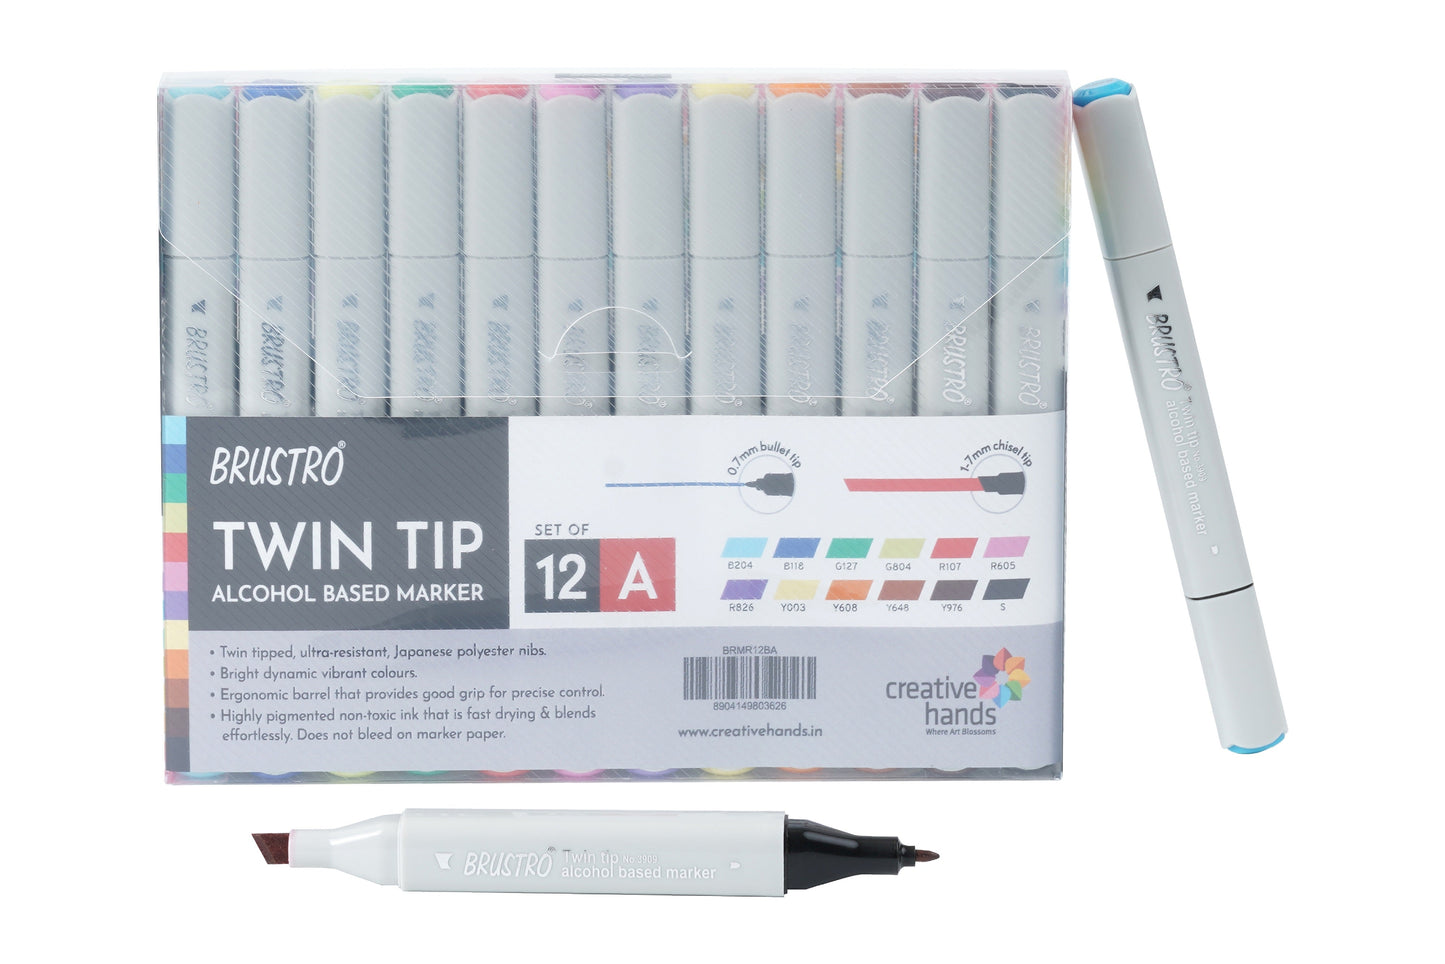 BRUSTRO Twin Tip Alcohol Based Basic A Marker Set (Pack of 12)